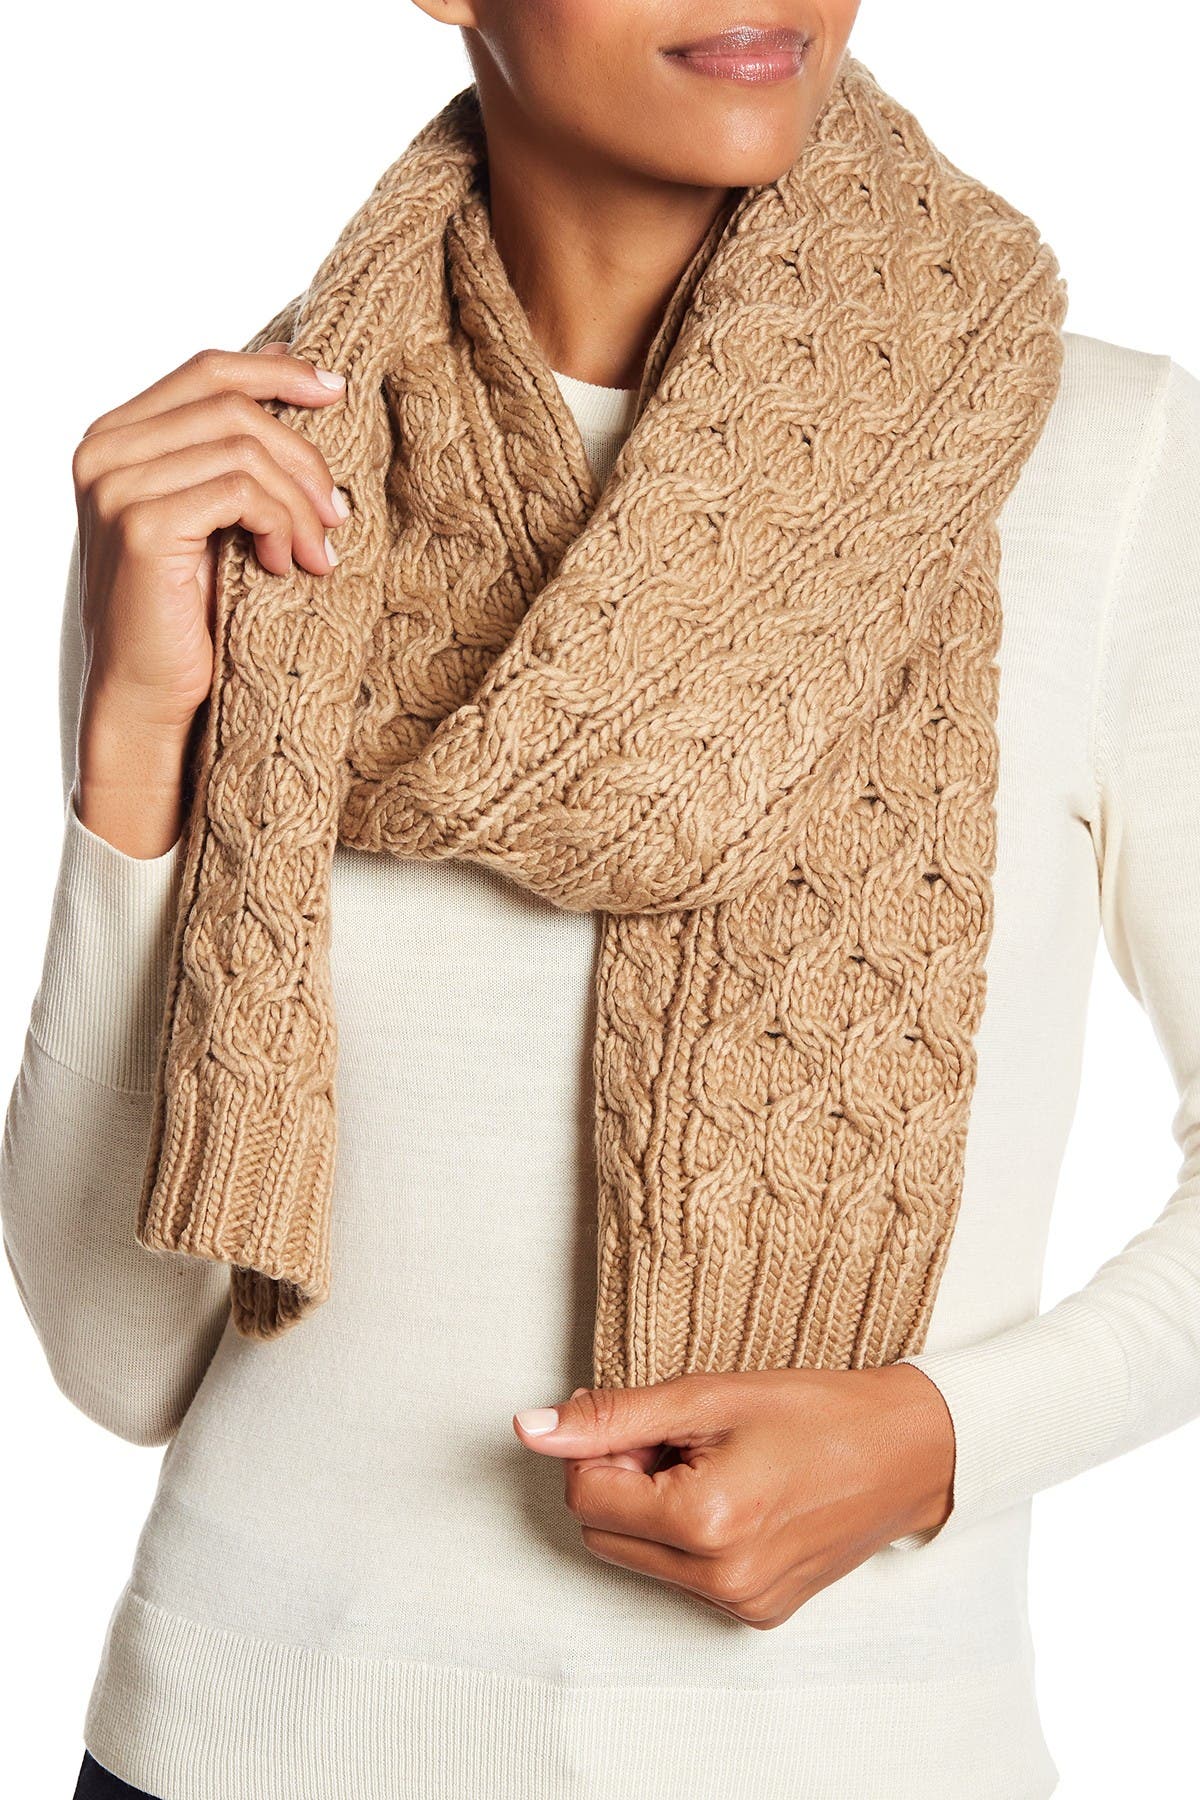 michael kors cable knit scarf